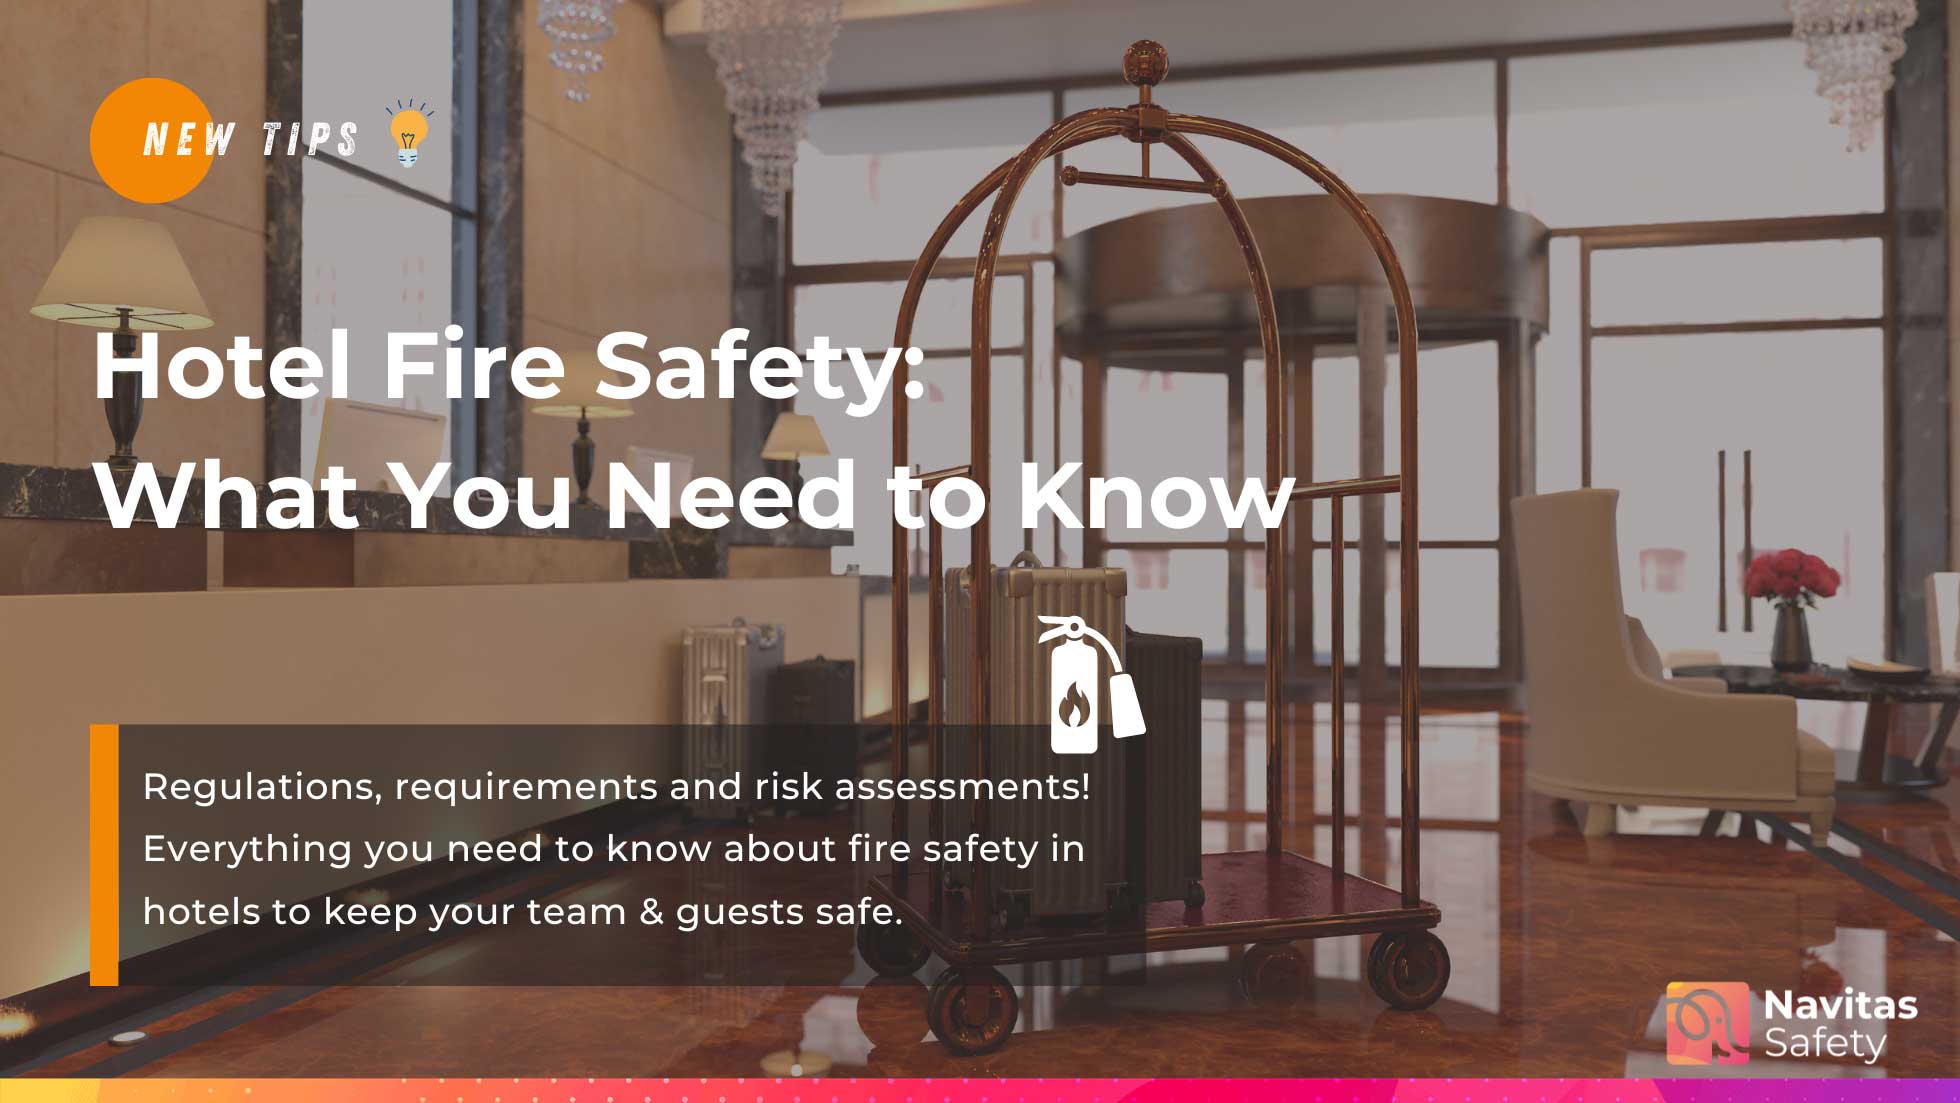 Hotel Fire Safety: What You Need to Know